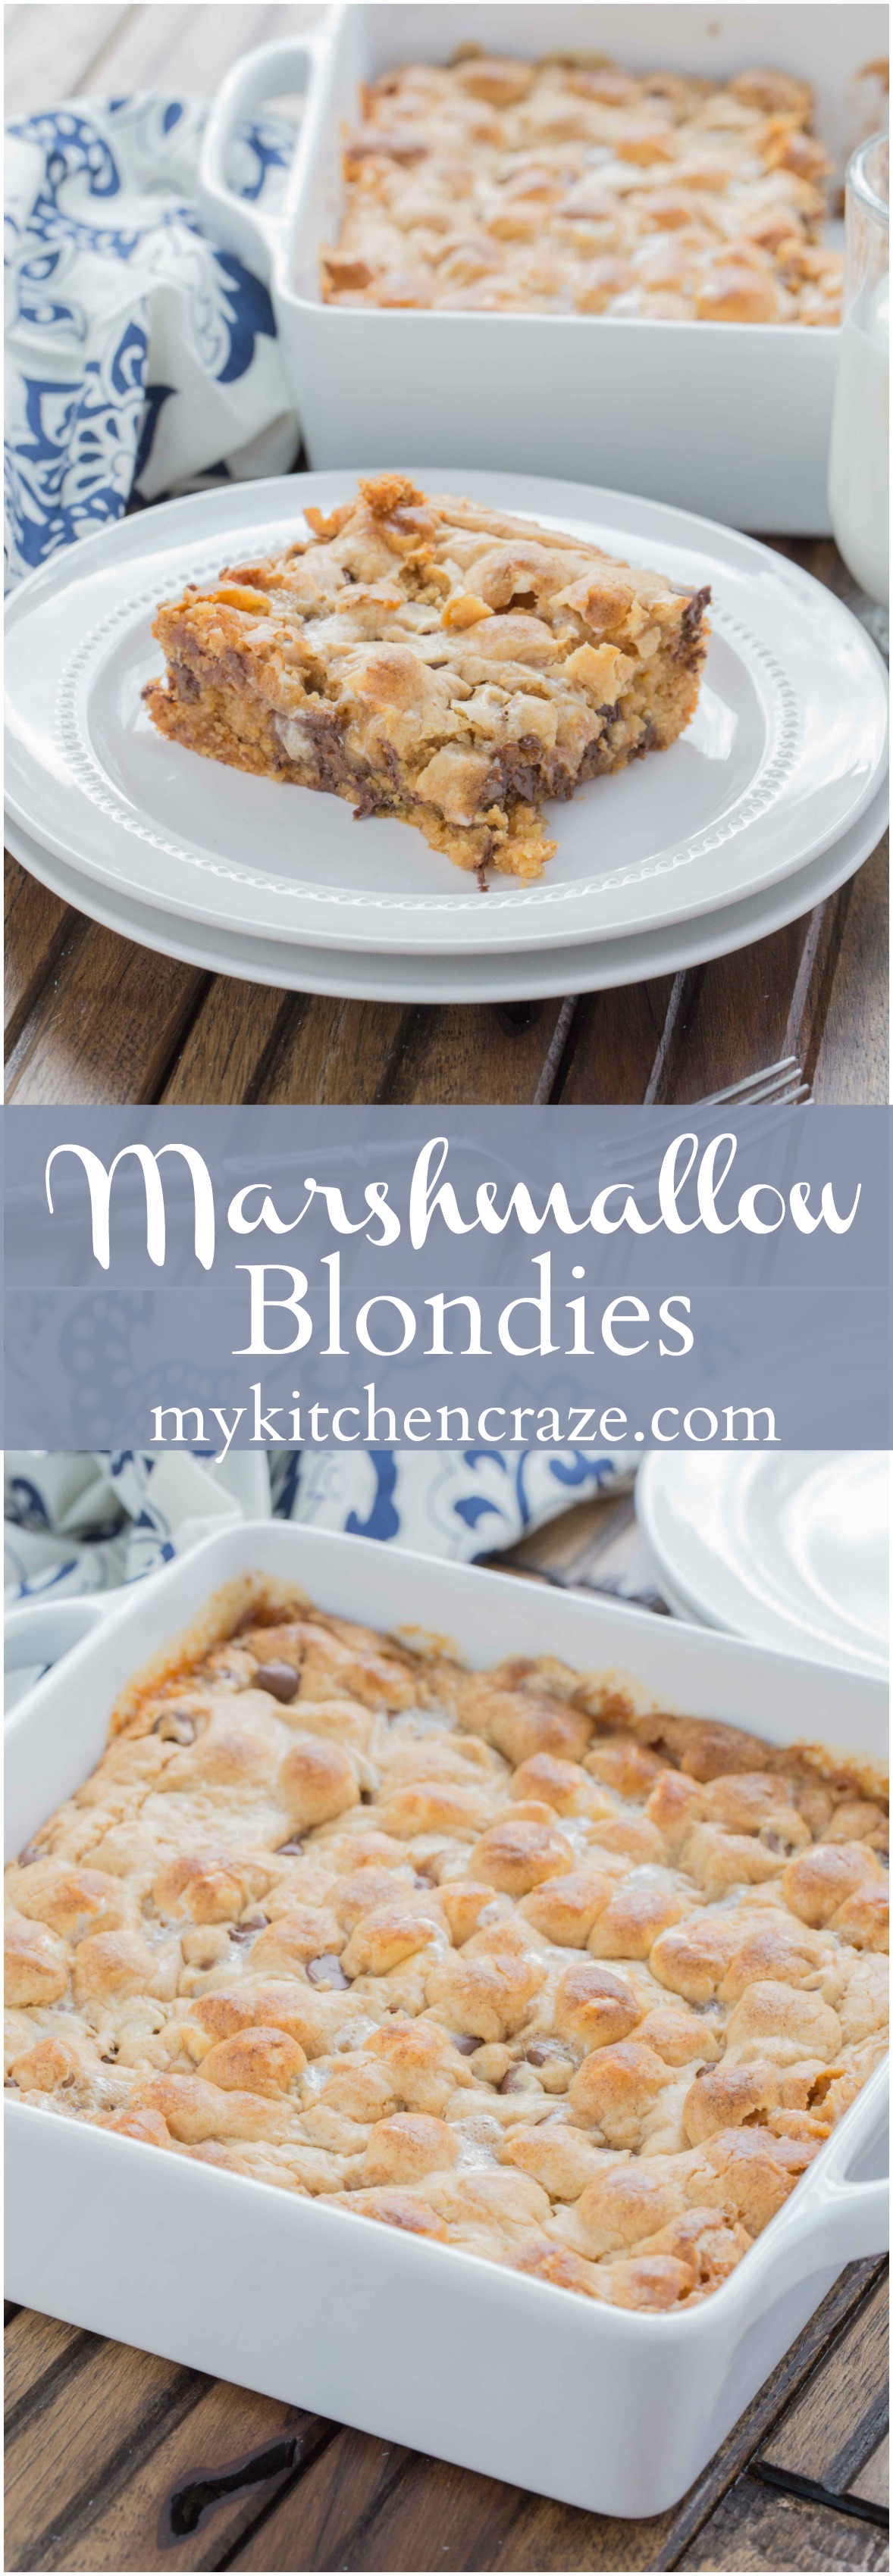 Marshmallow Blondies ~ mykitchencraze.com ~ Need a tasty and quick dessert? These Marshmallow Blondies are it. Filled with peanut butter chips, chocolate chips, mini marshmallows, baked to perfection and voila, you have yourself a tasty treat!